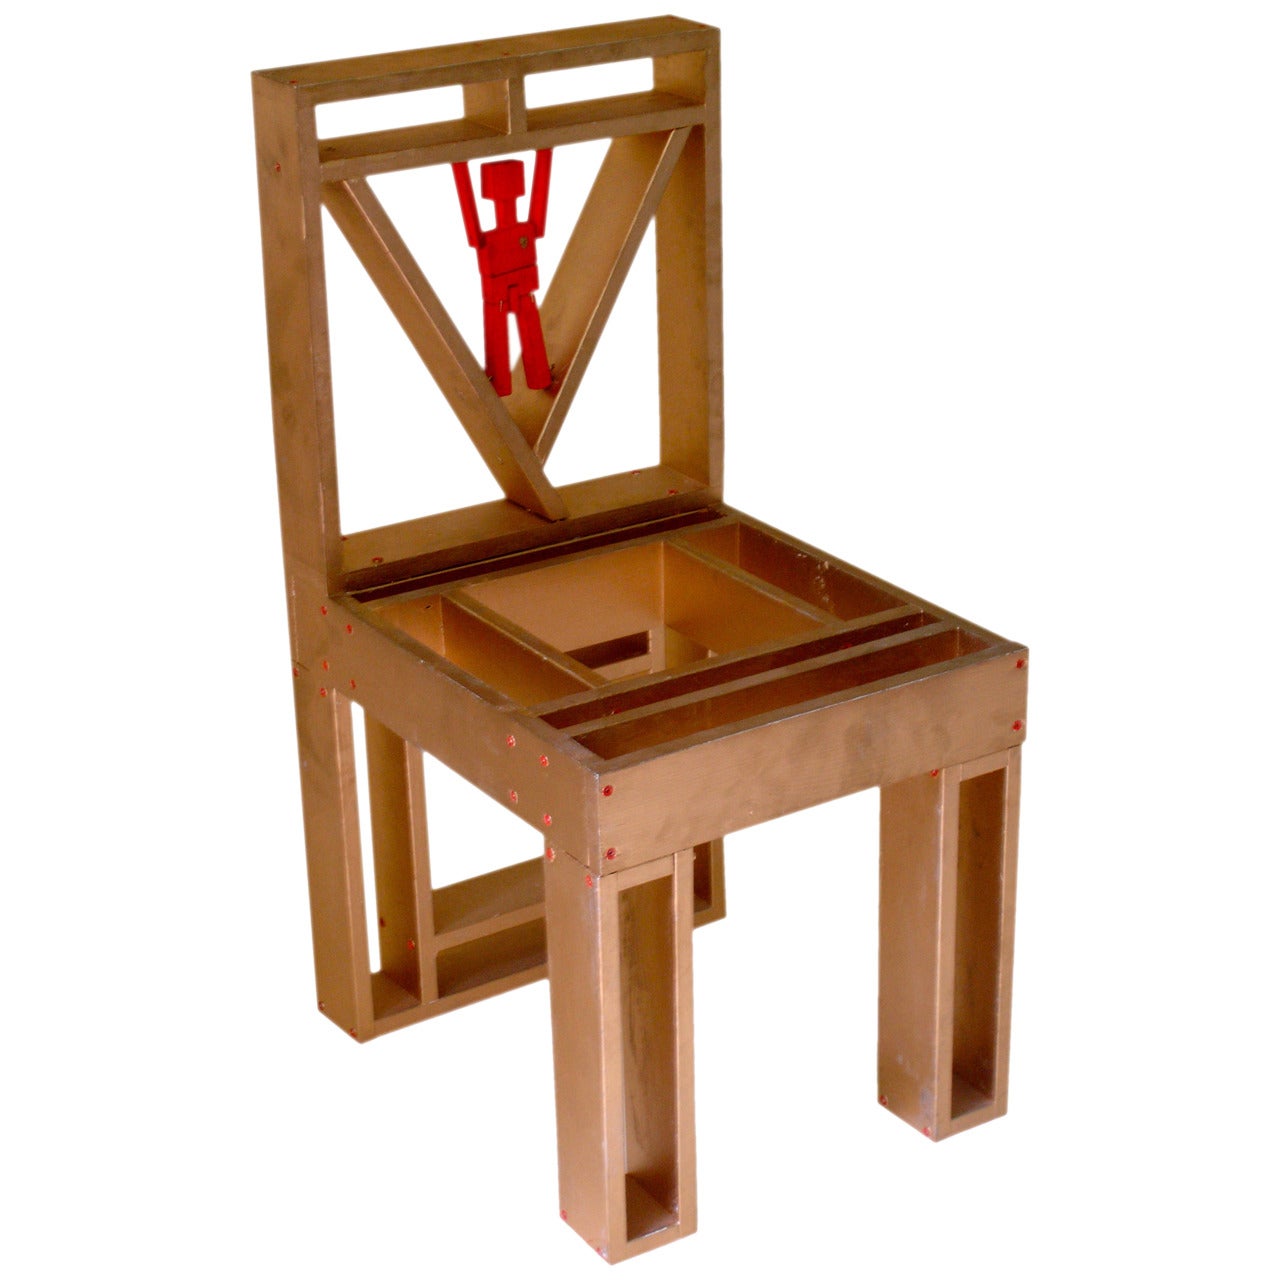  Artist Ronn Jaffe One of a Kind Prototype Wood P Man Chair For Sale